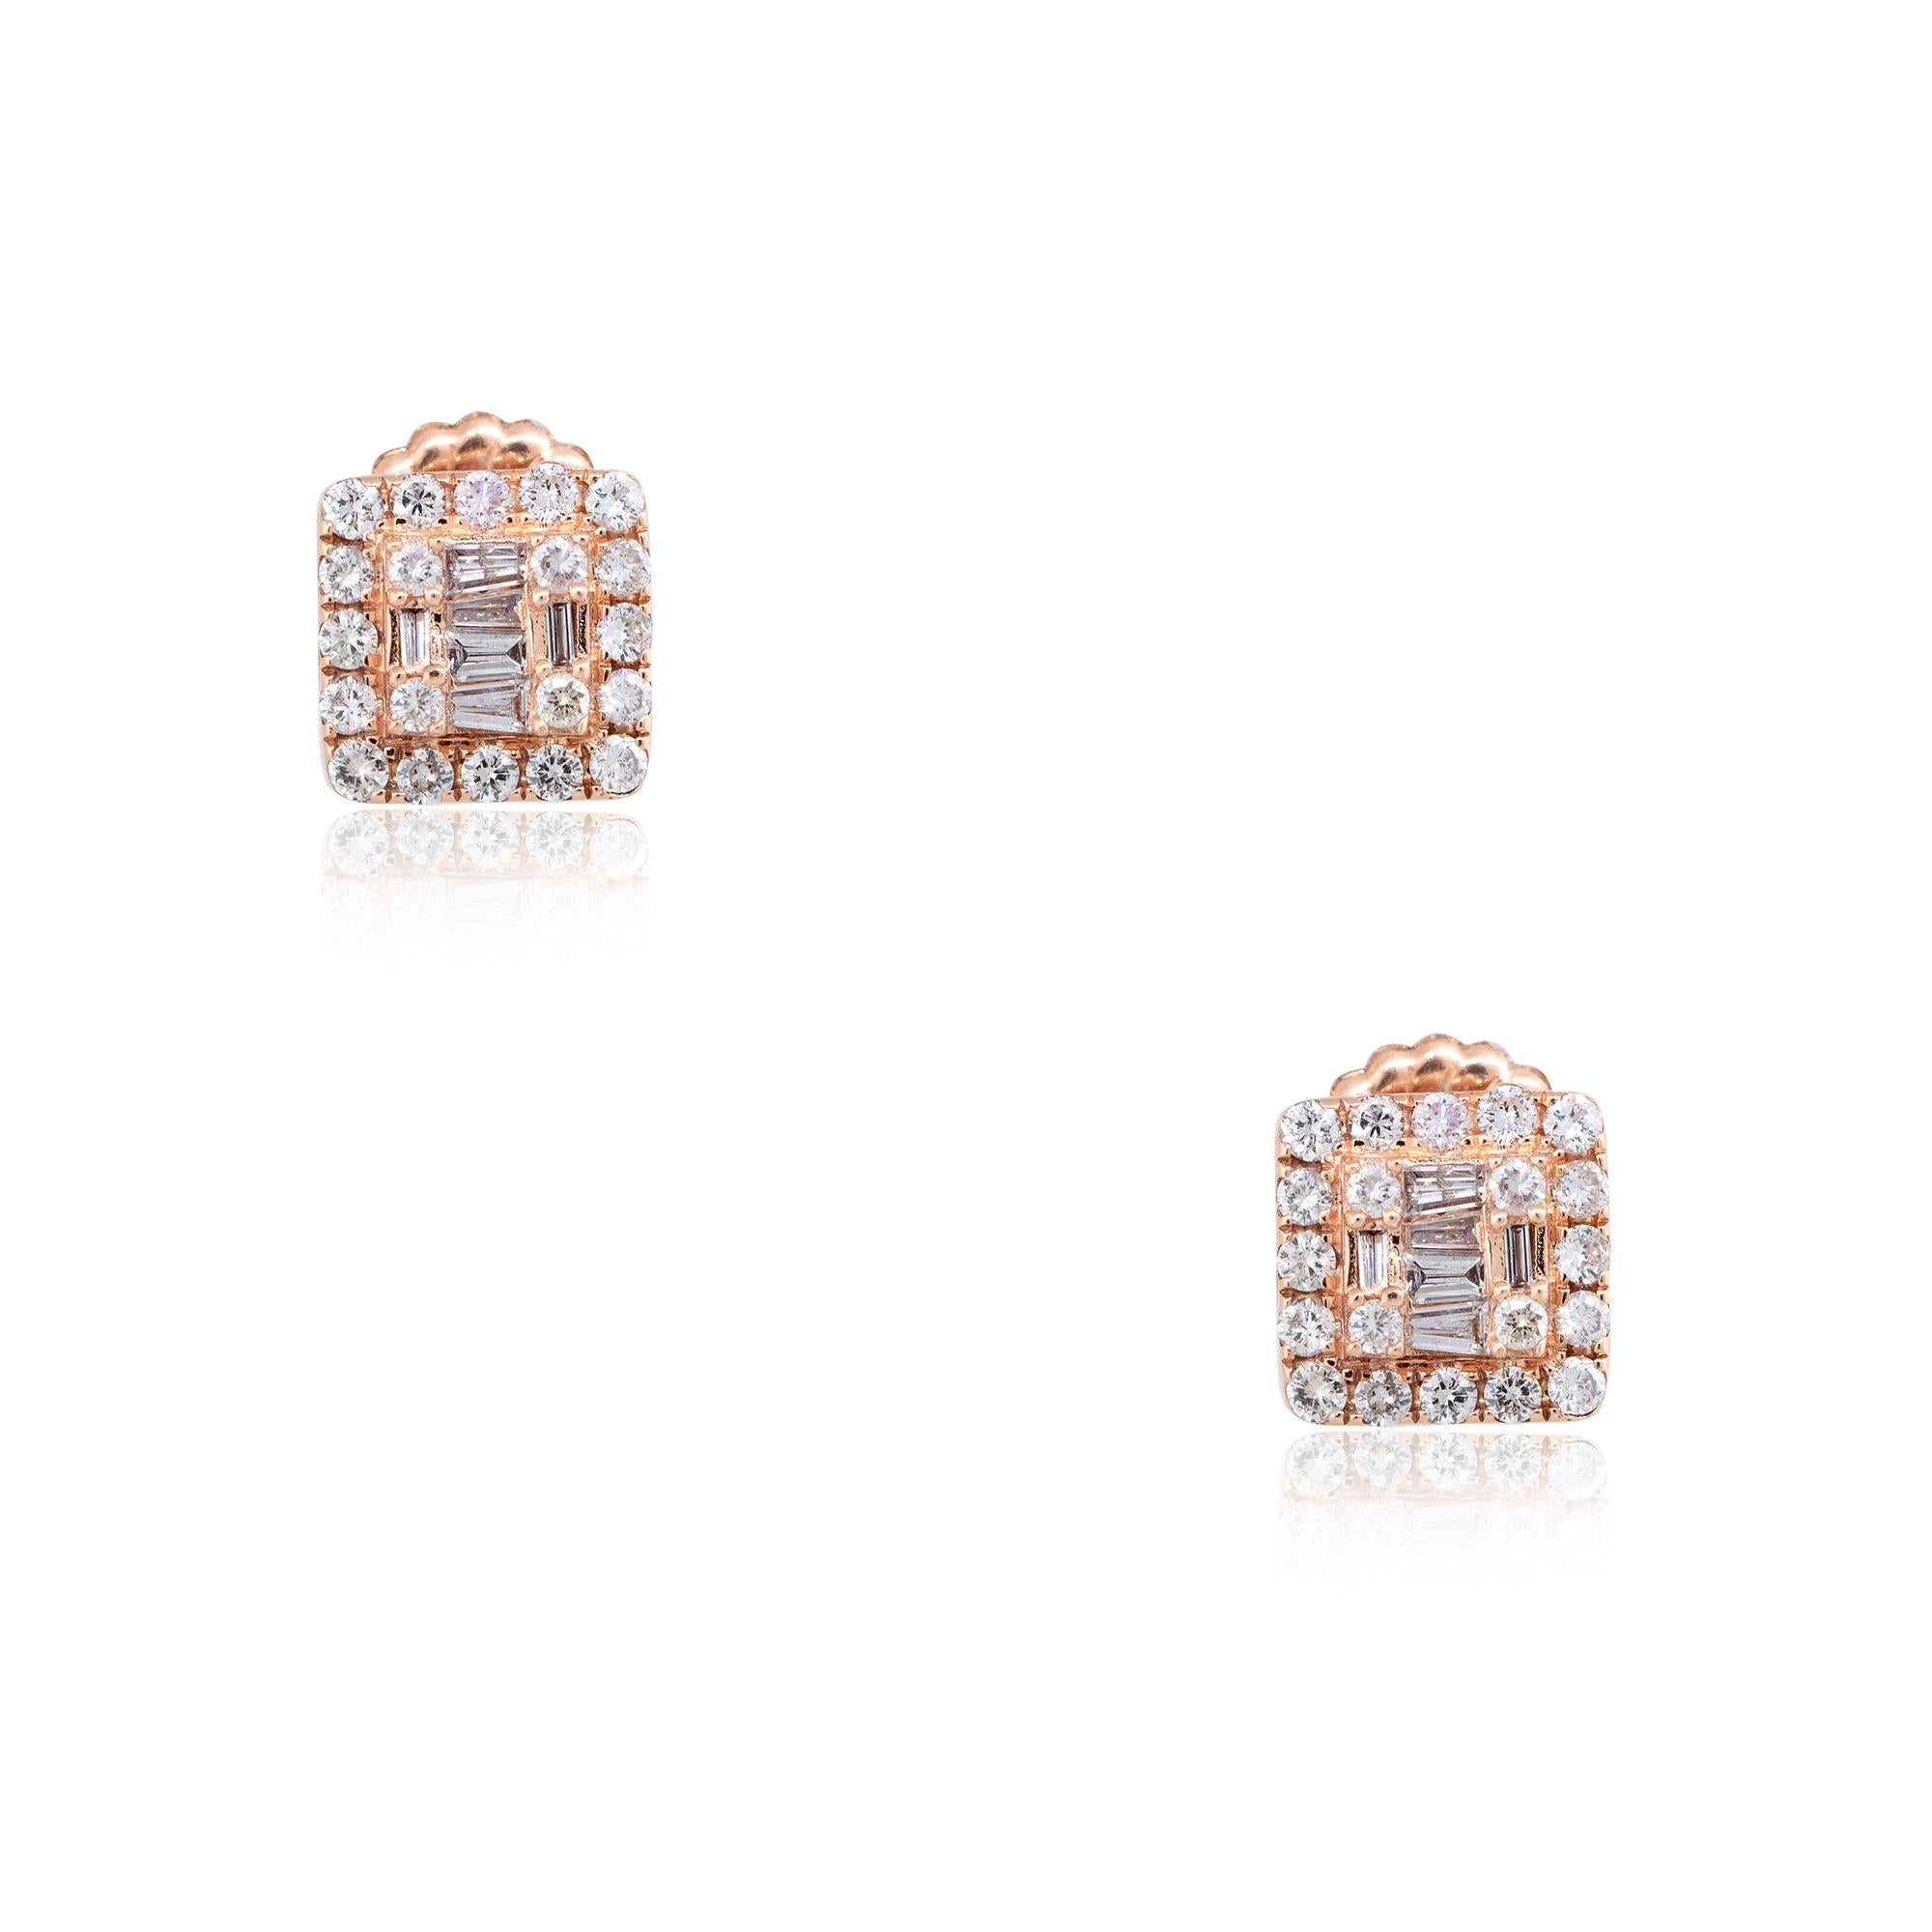 14k Rose Gold 0.74ctw Round Brilliant & Baguette Cut Diamond Mosaic Square Earrings

Product: Mosaic Diamond Square Earrings
Diamonds: All natural diamonds
Material: 14k Rose Gold
Diamond Details: There are approximately 0.60 carats of round